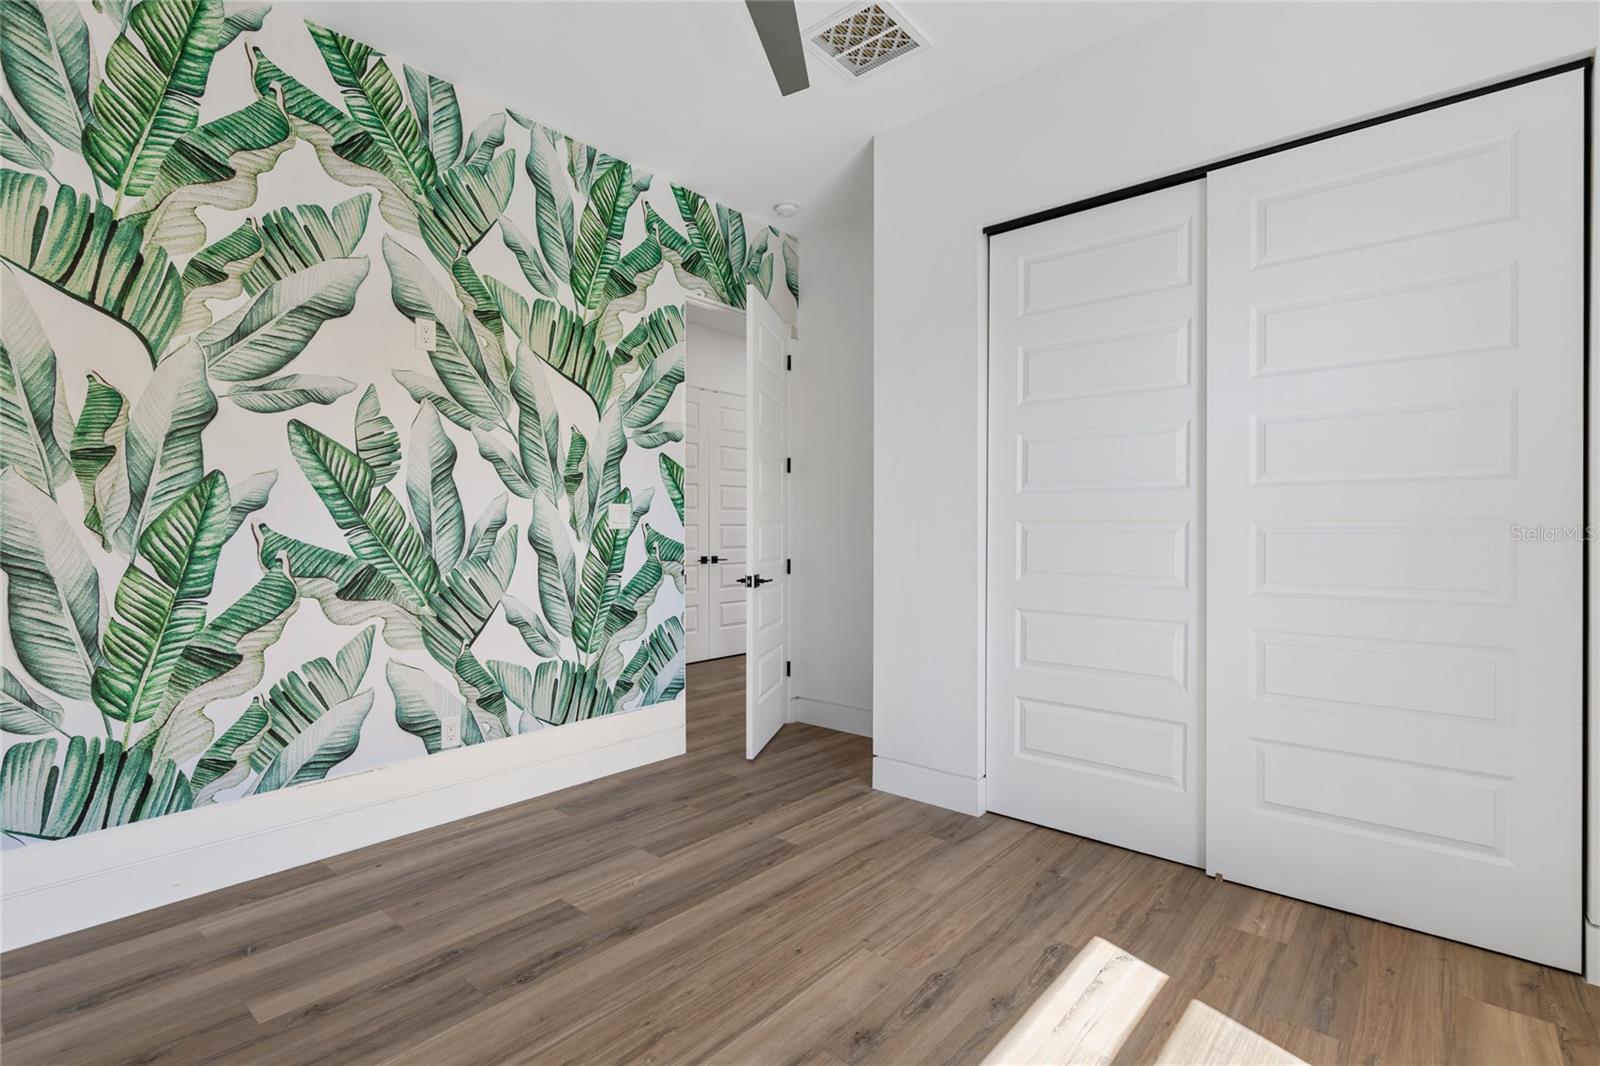 2nd bedroom with wall leaf wallpaper